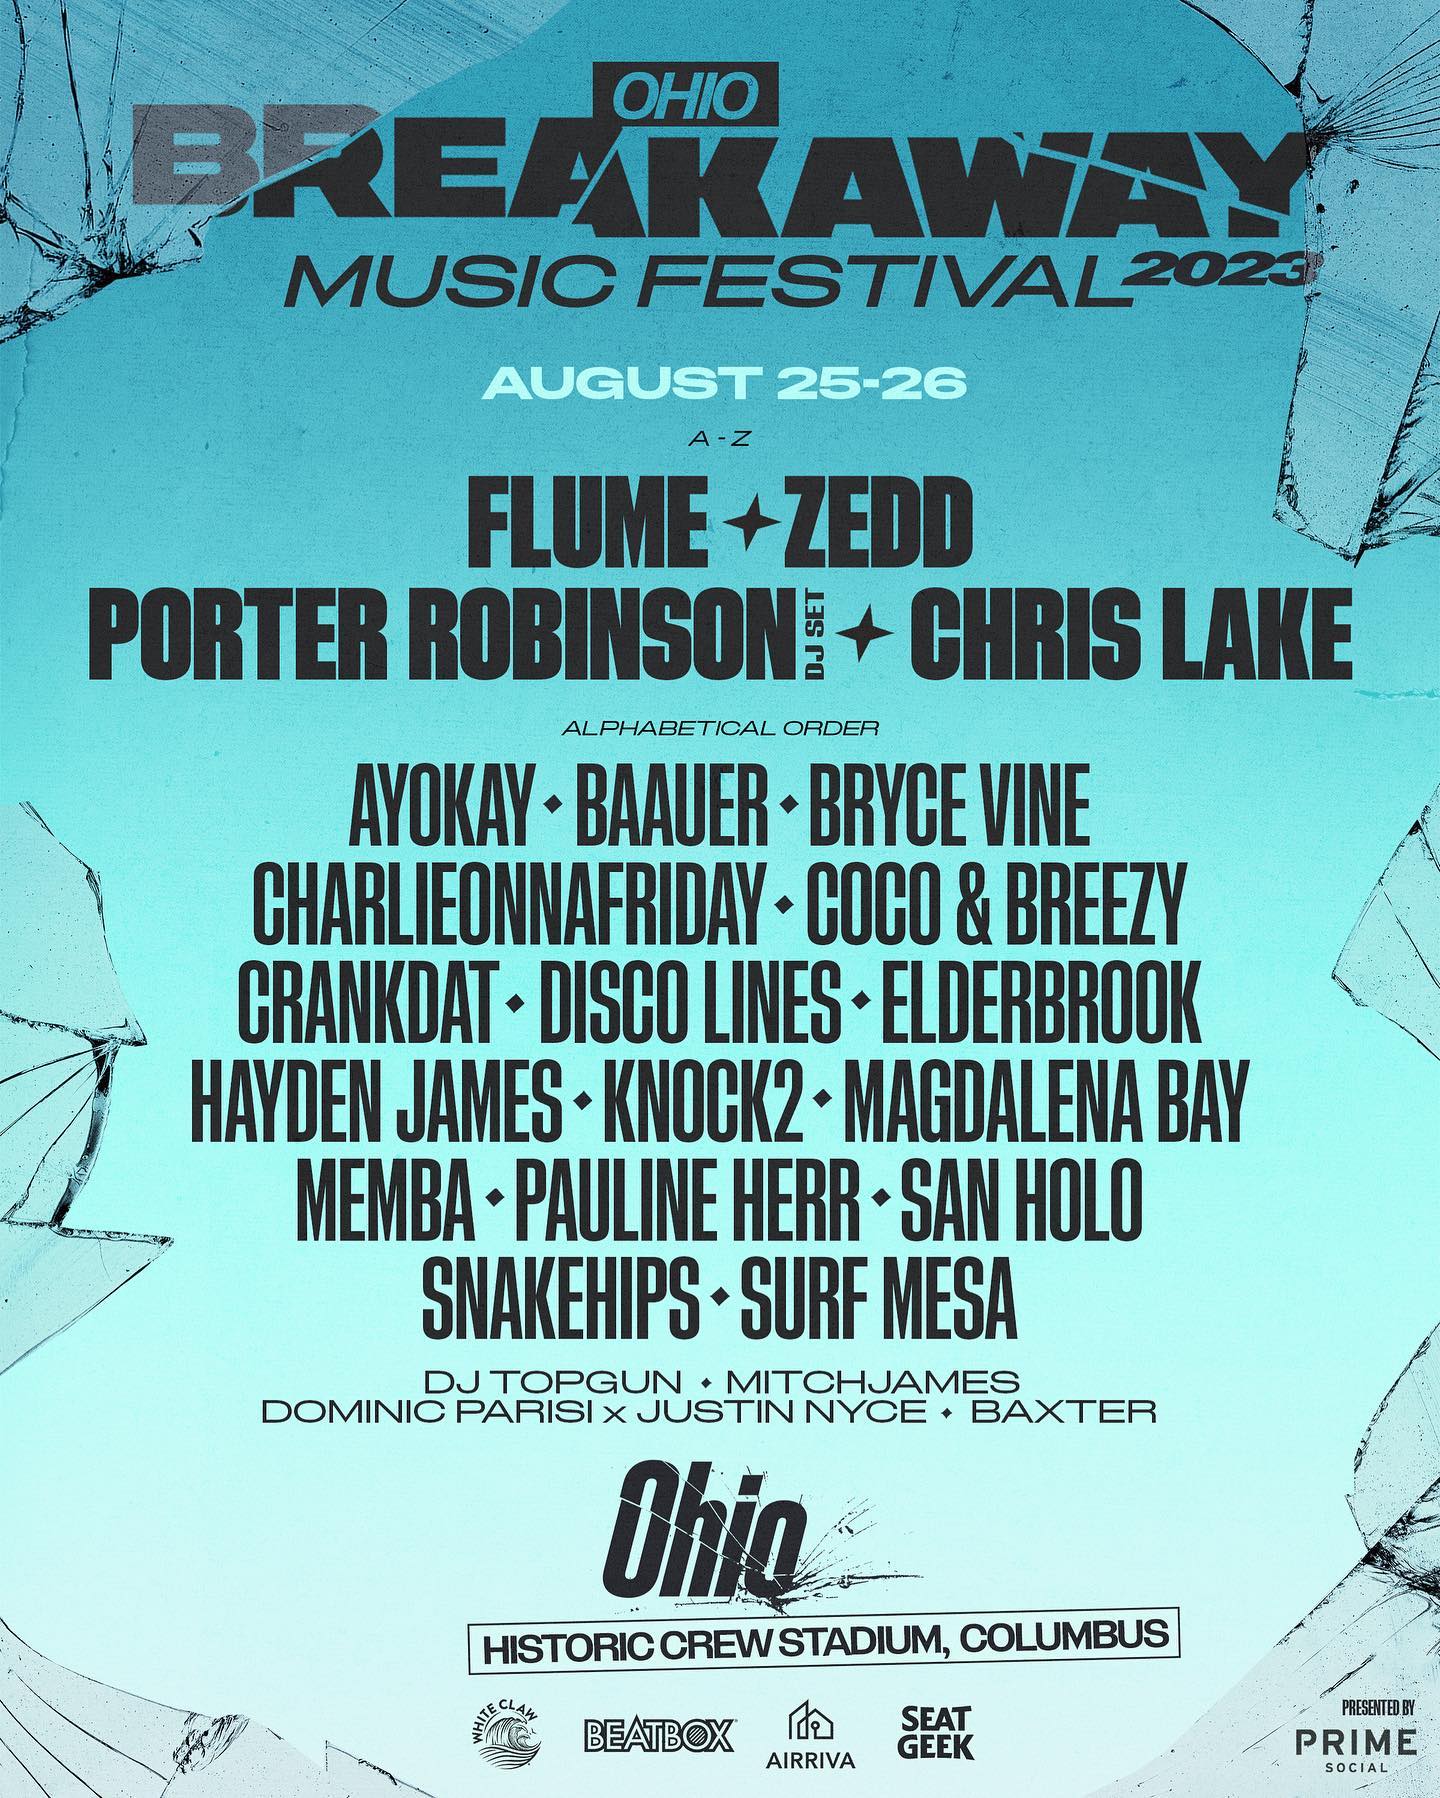 Festival Breakaway Music Festival Columbus, Ohio tickets and lineup